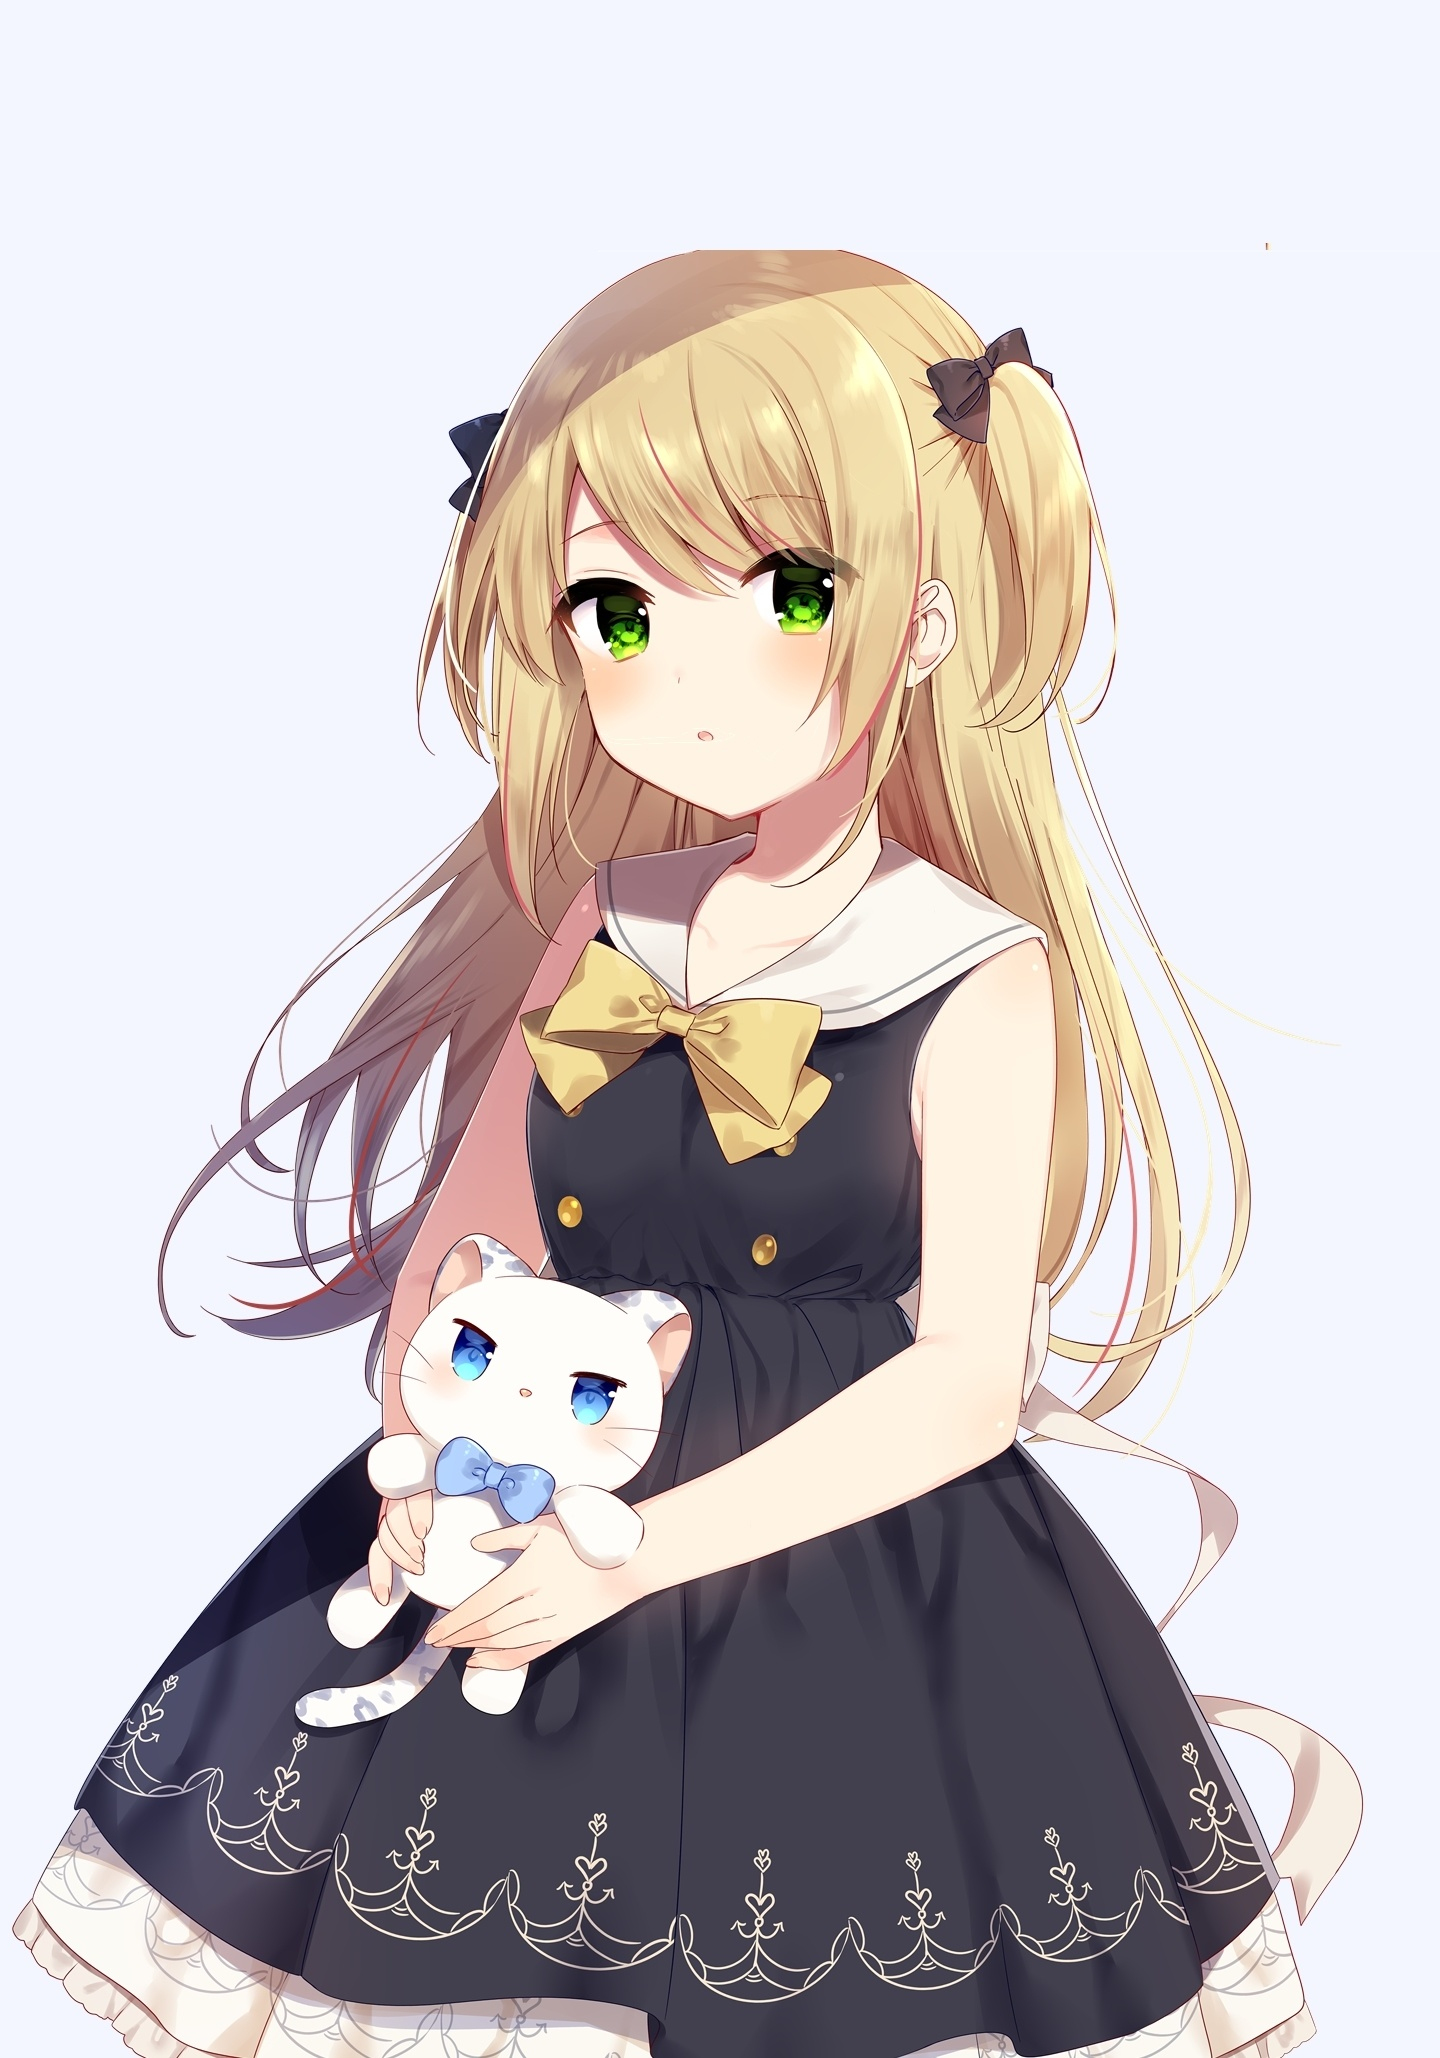 Download wallpaper 1440x2630 cute anime girl and her kitten original  samsung galaxy note 8 1440x2630 hd background 8596